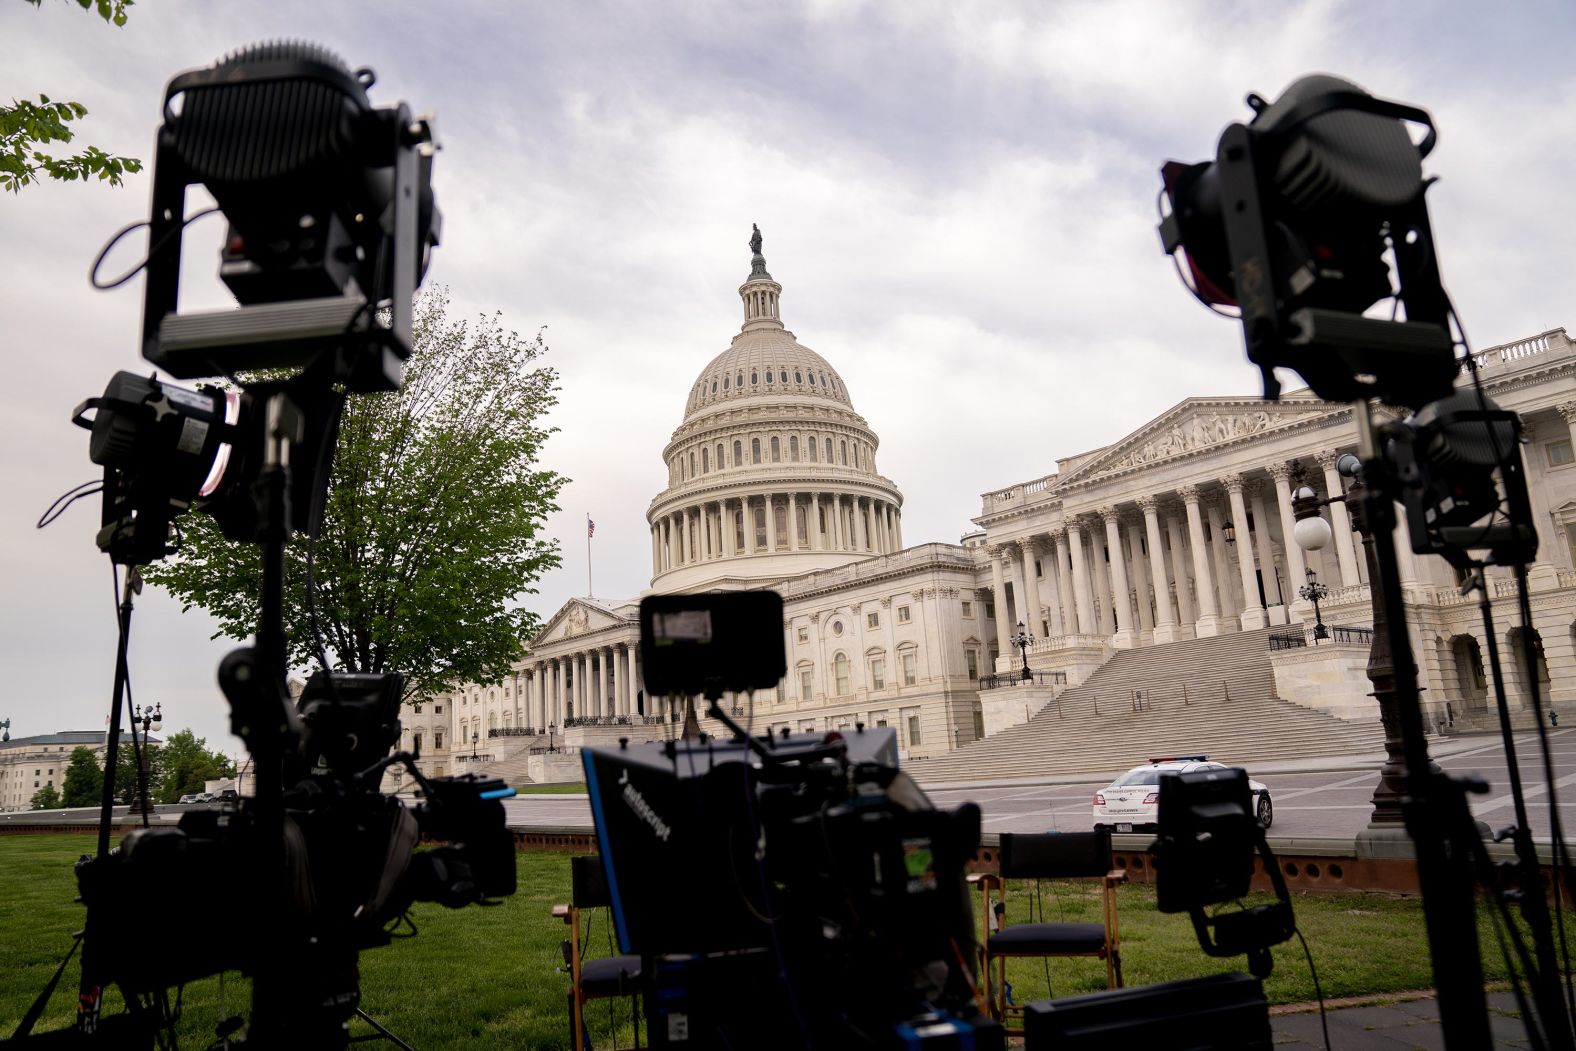 Television equipment is set up in front of the Capitol on Wednesday.